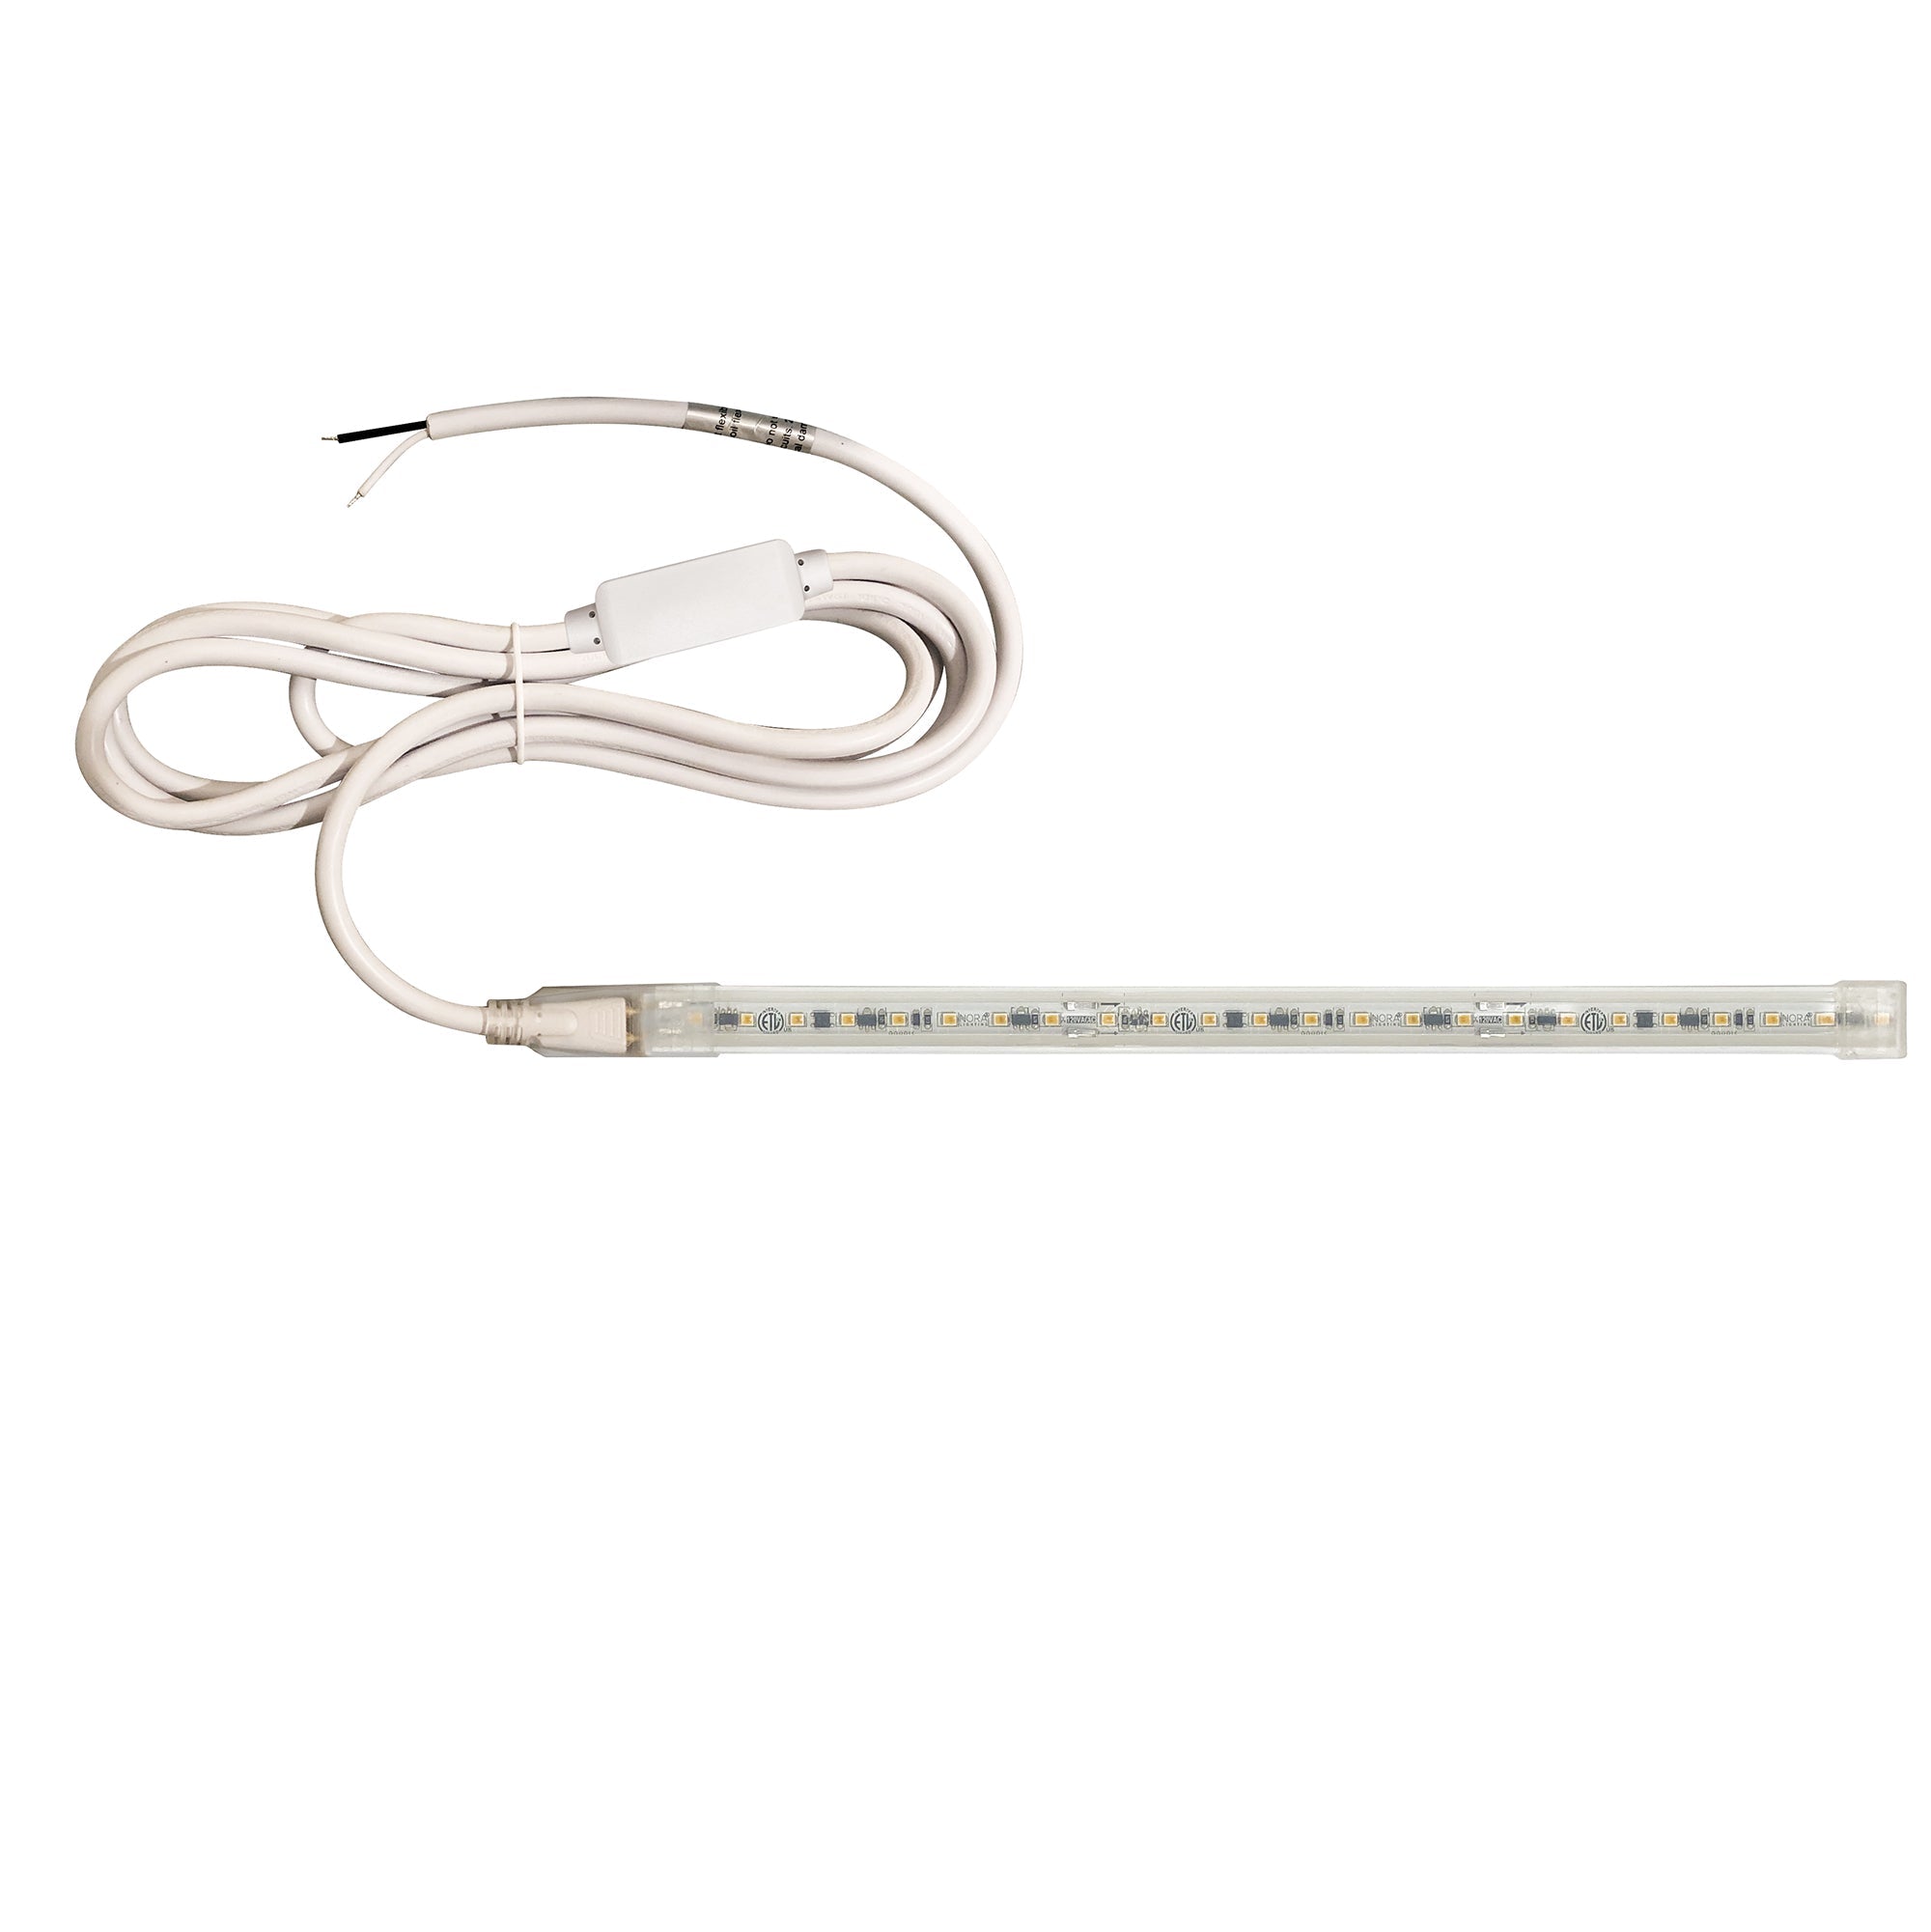 Nora Lighting NUTP13-W56-8-12-930/HWSP - Accent / Undercabinet - Custom Cut 56-ft, 8-in 120V Continuous LED Tape Light, 330lm / 3.6W per foot, 3000K, w/ Mounting Clips and 8' Hardwired Power Cord w/ Surge Protector